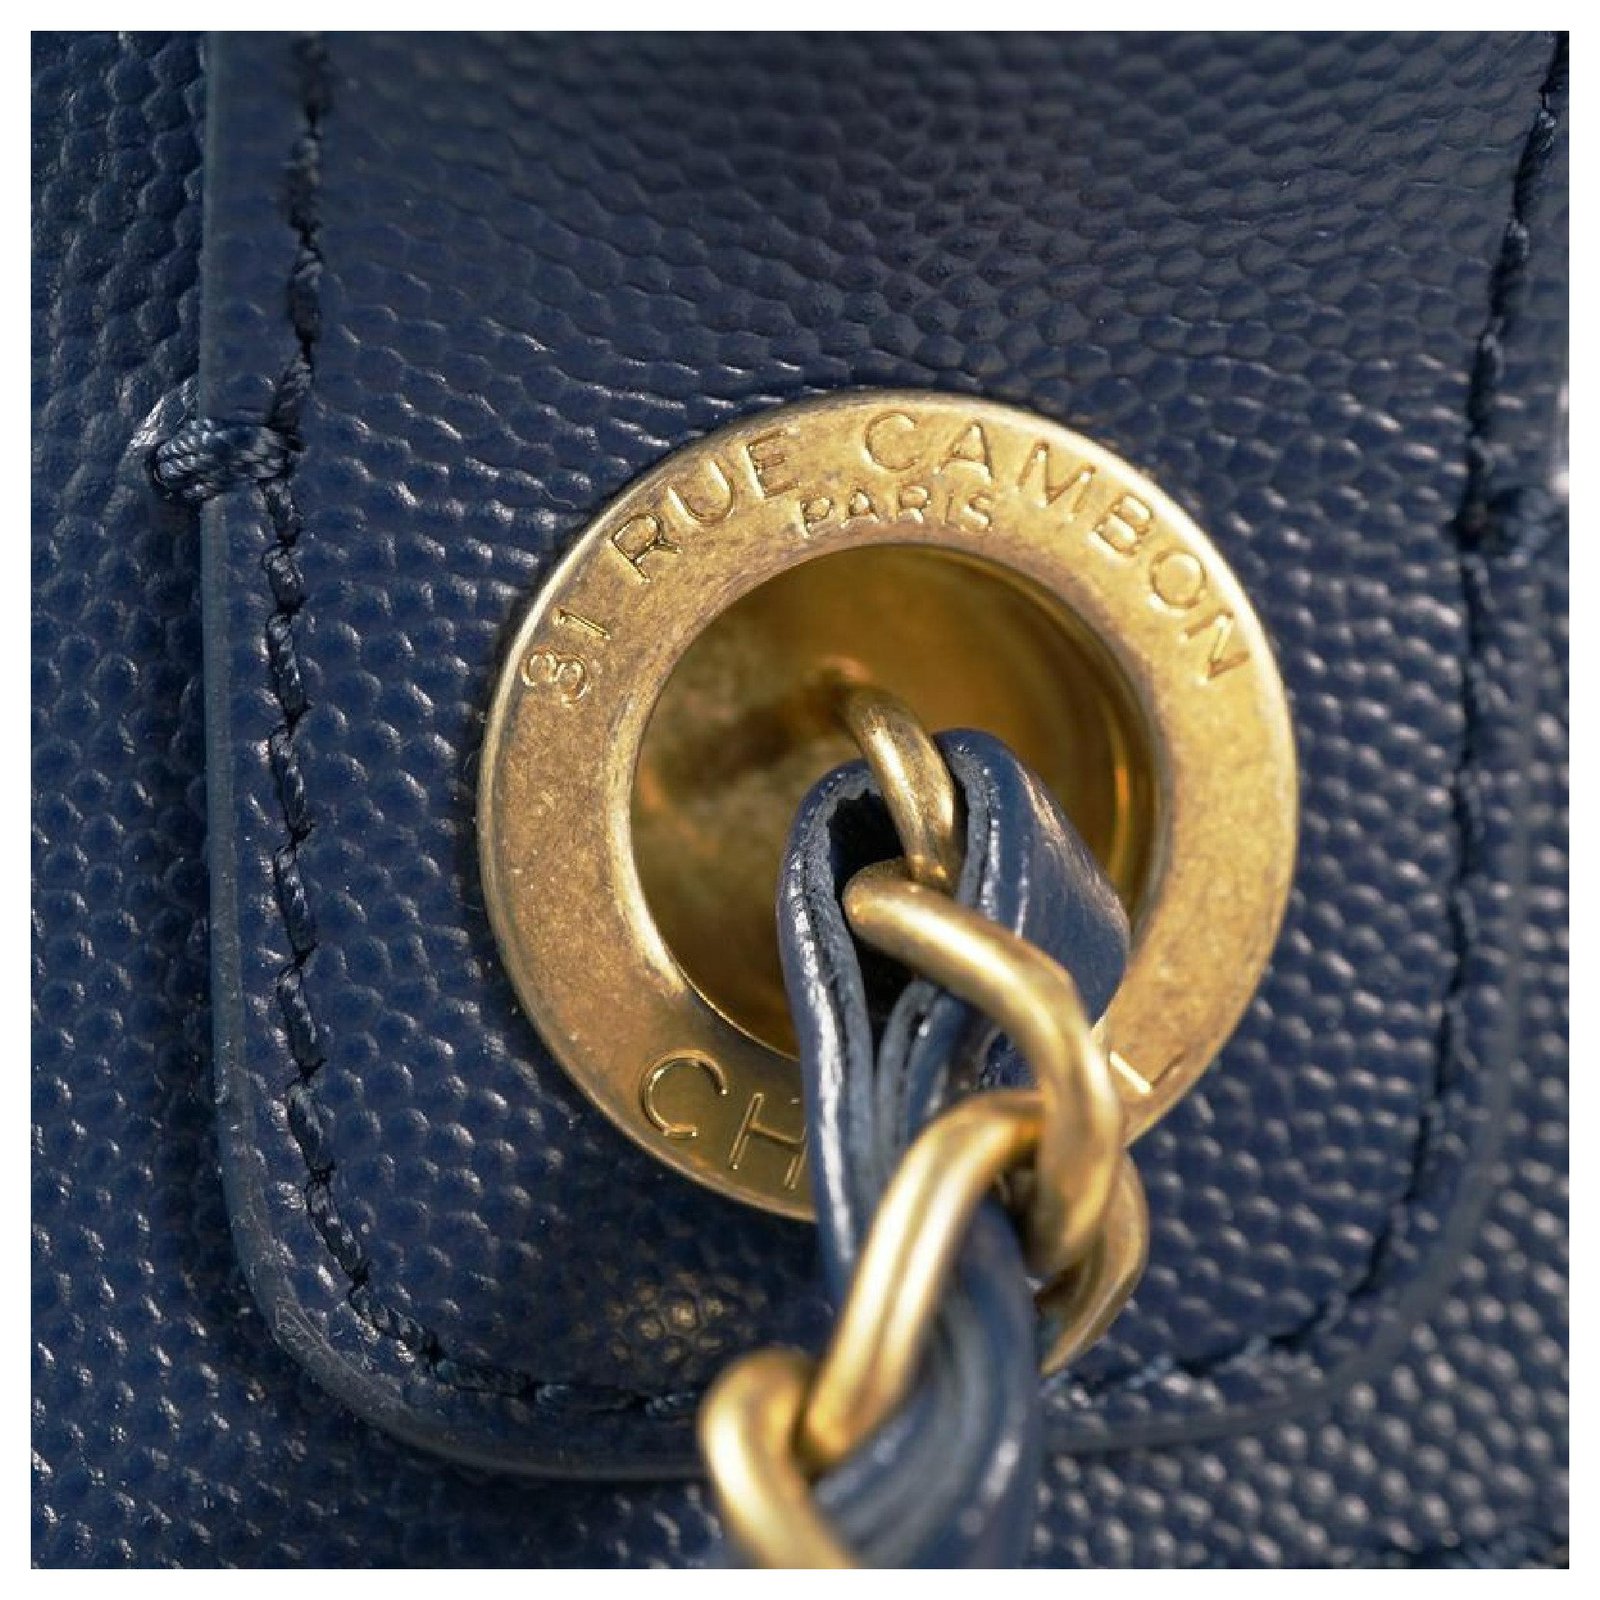 Chanel 2WAY shoulder bag Deauville stats chain tote Womens tote bag Navy x  gold hardware